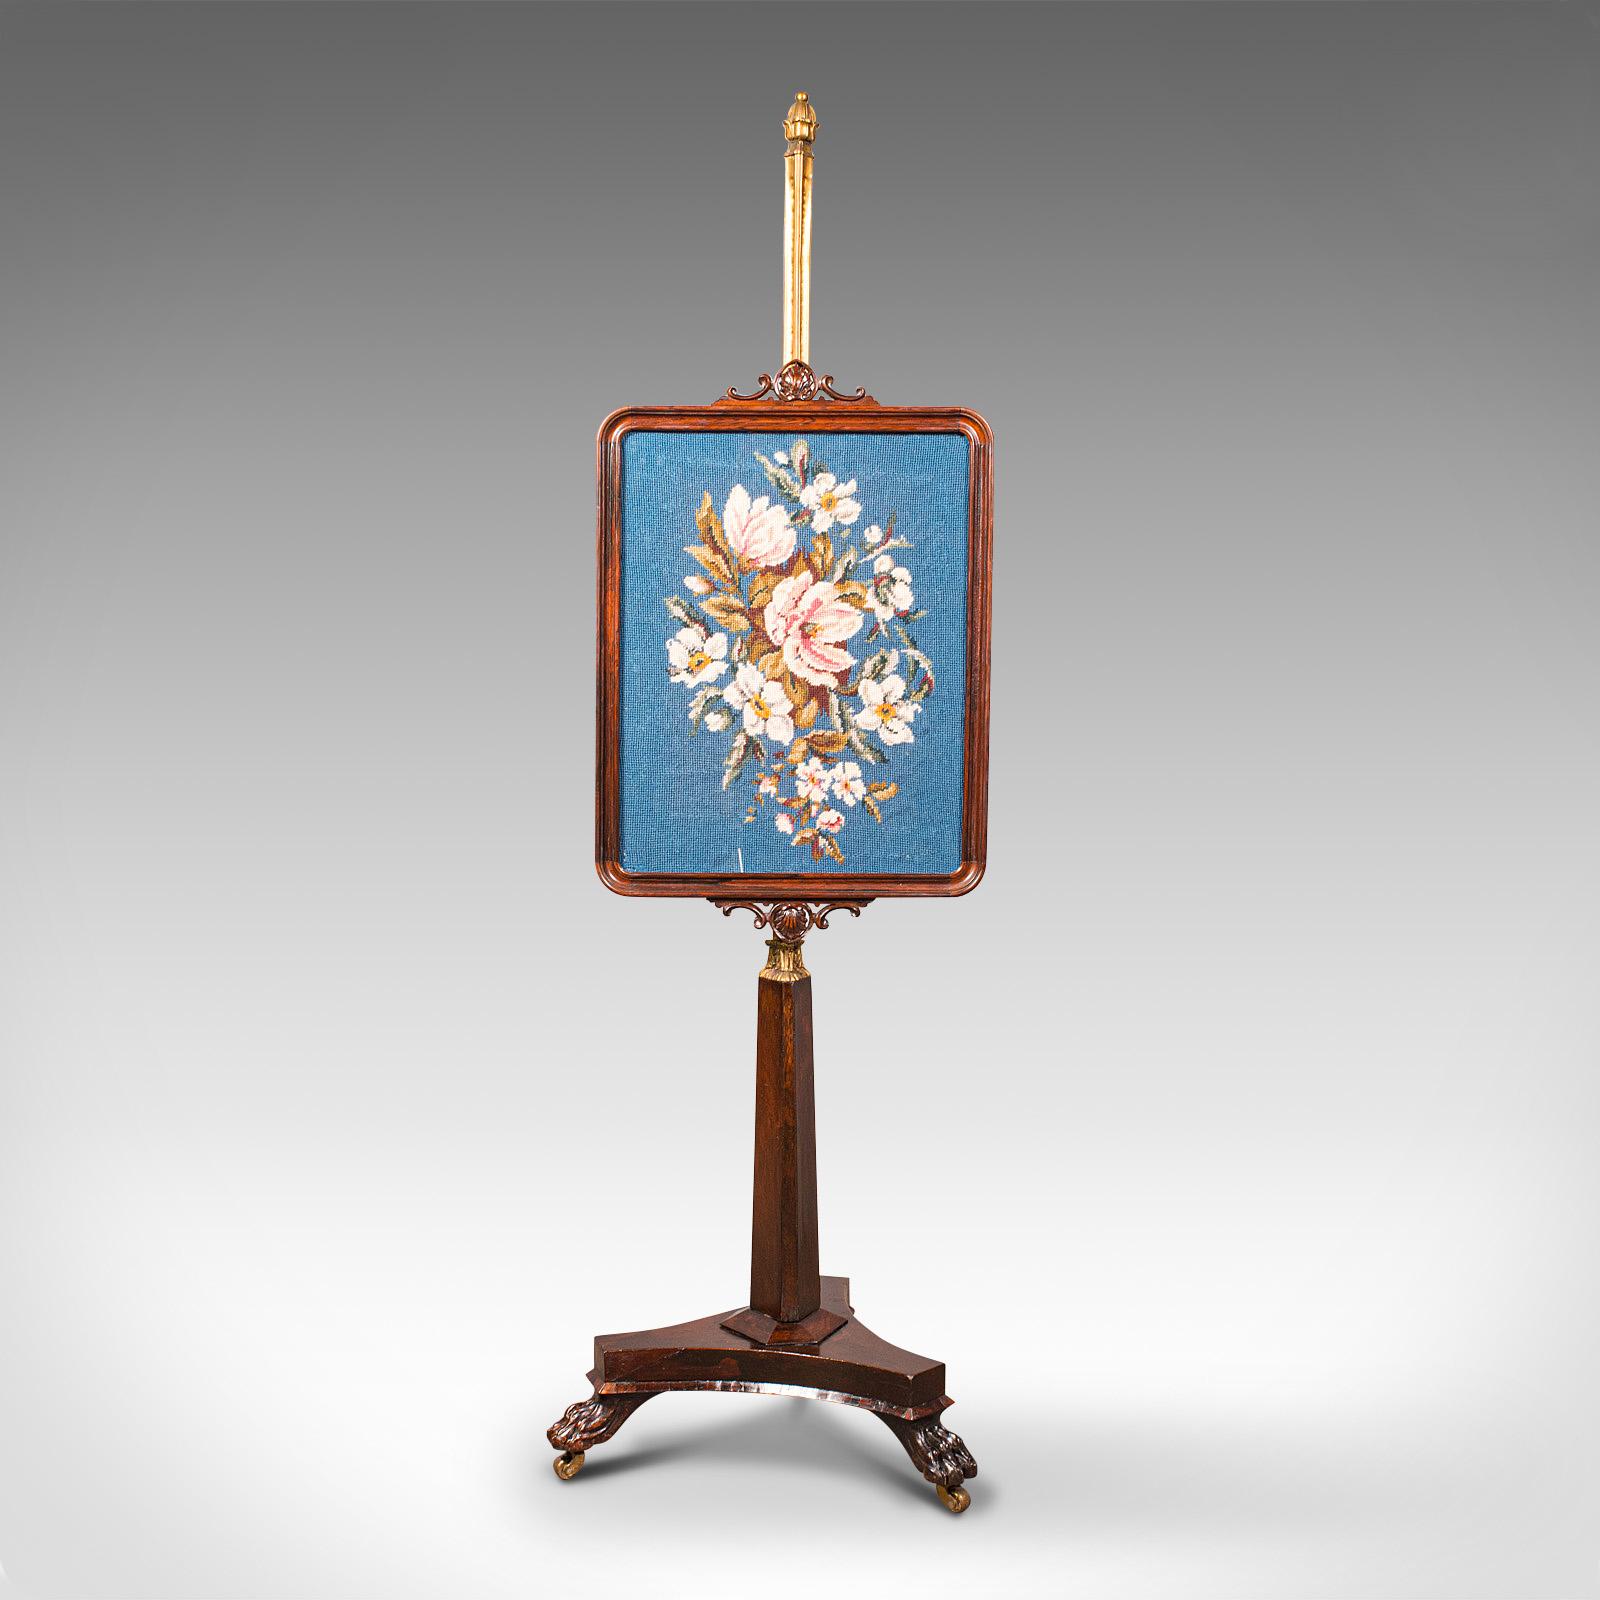 British Antique Fireside Pole Screen, English, Rosewood, Needlepoint, William IV, C.1830 For Sale